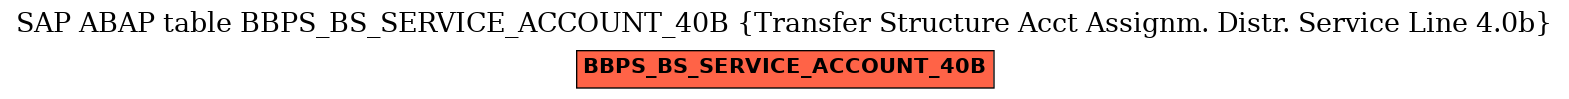 E-R Diagram for table BBPS_BS_SERVICE_ACCOUNT_40B (Transfer Structure Acct Assignm. Distr. Service Line 4.0b)